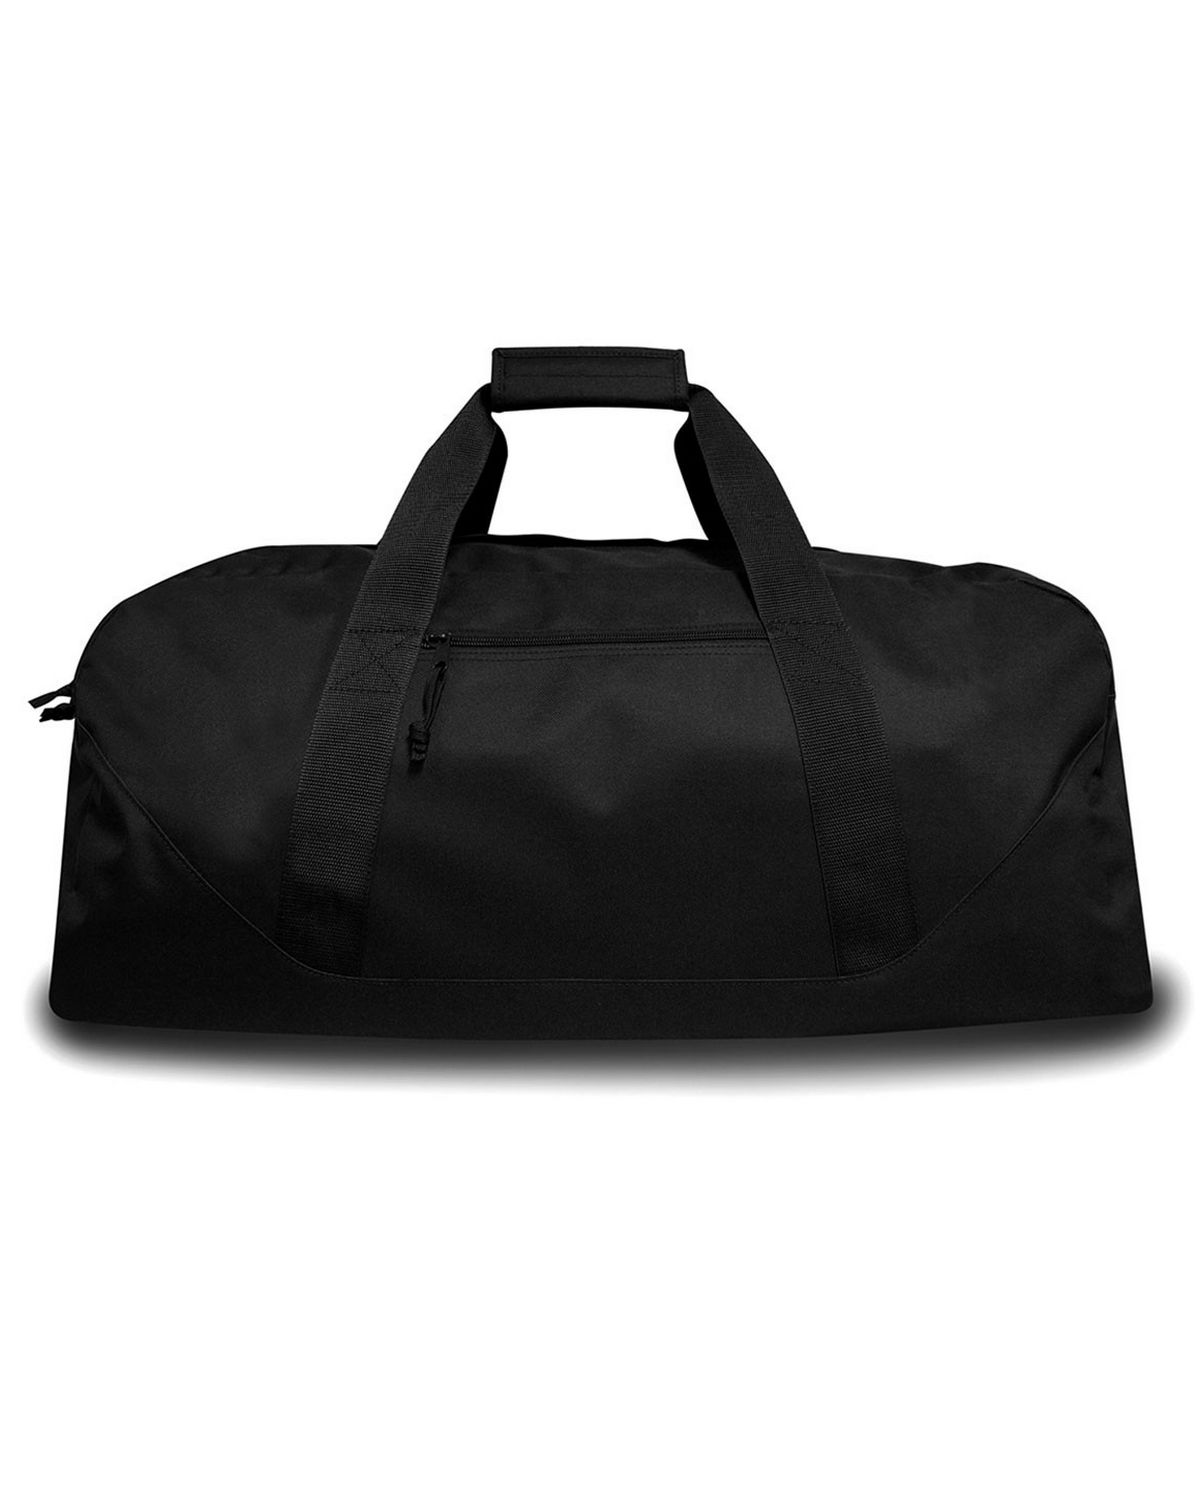 Size Chart for Liberty Bags LB8823 XL Dome 27 Duffle Bag